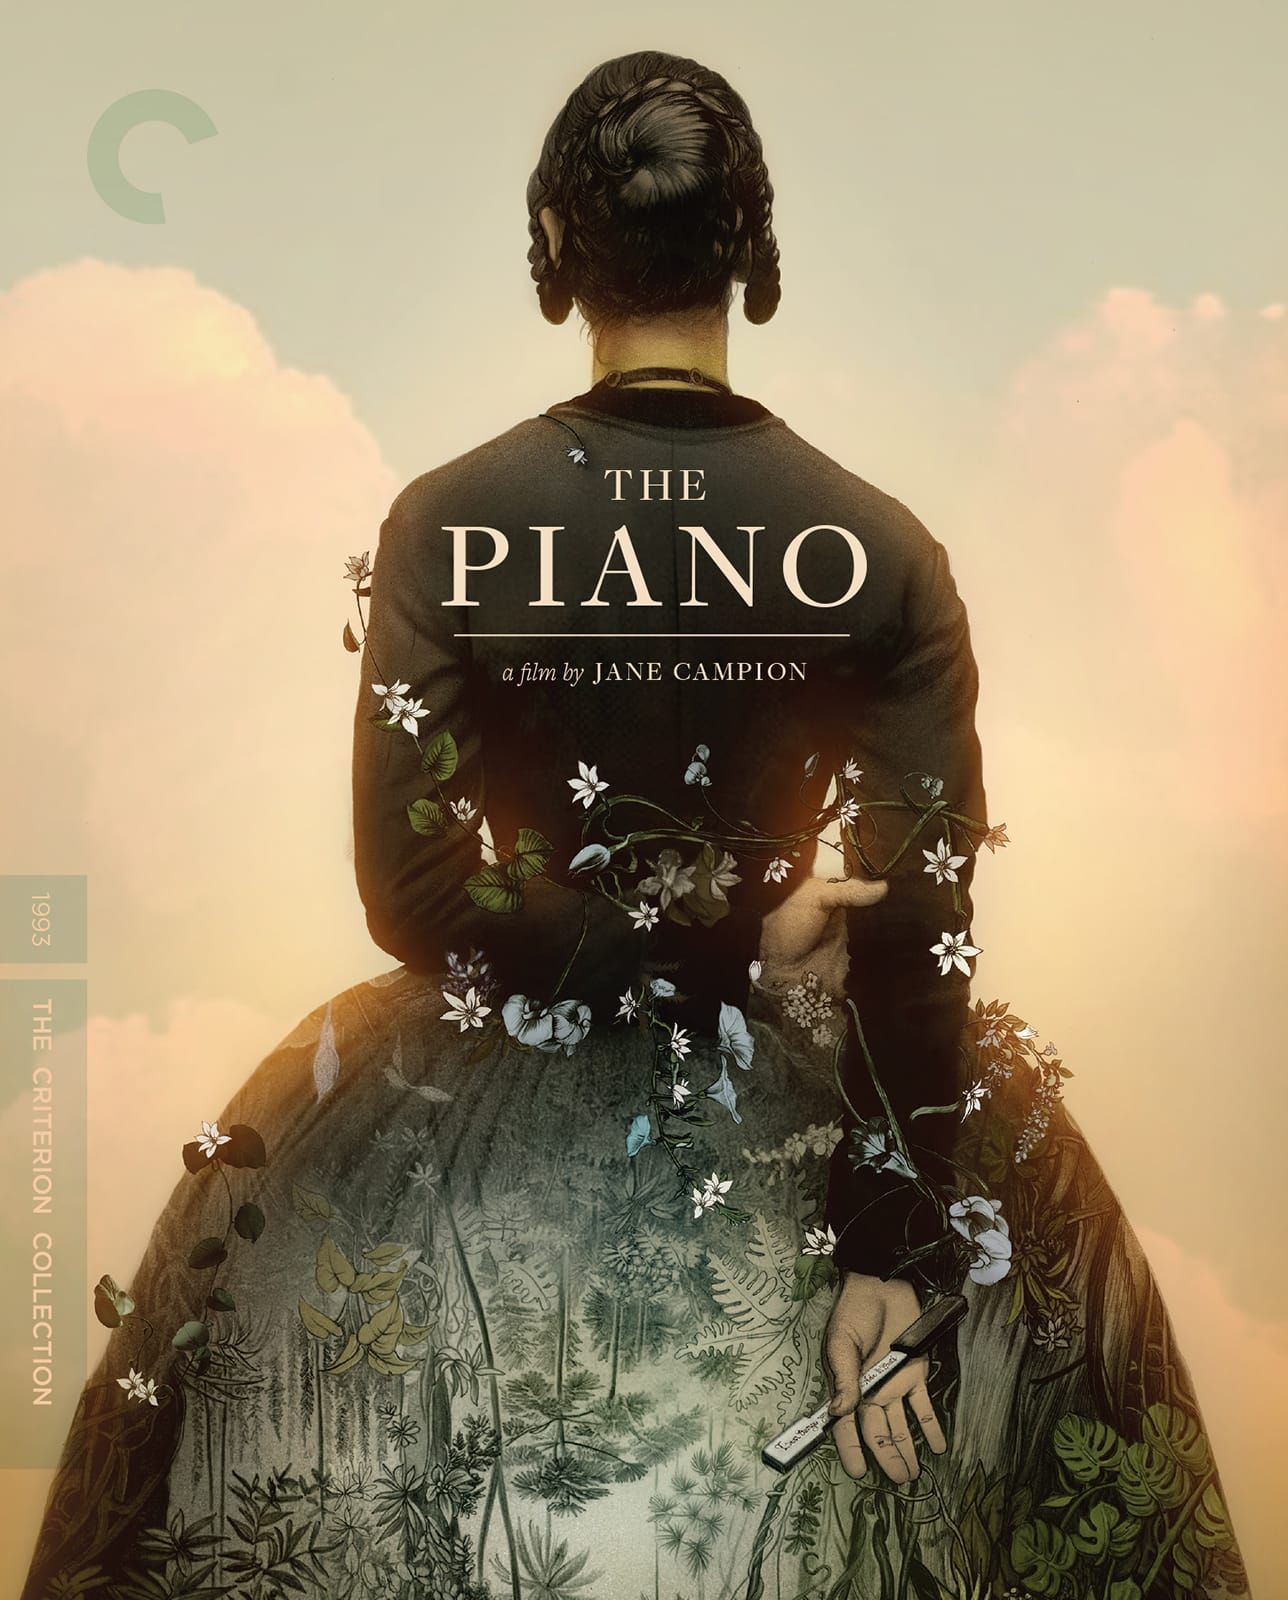 Replaying “The Piano”: Lessons from “A Girl’s Own Story”